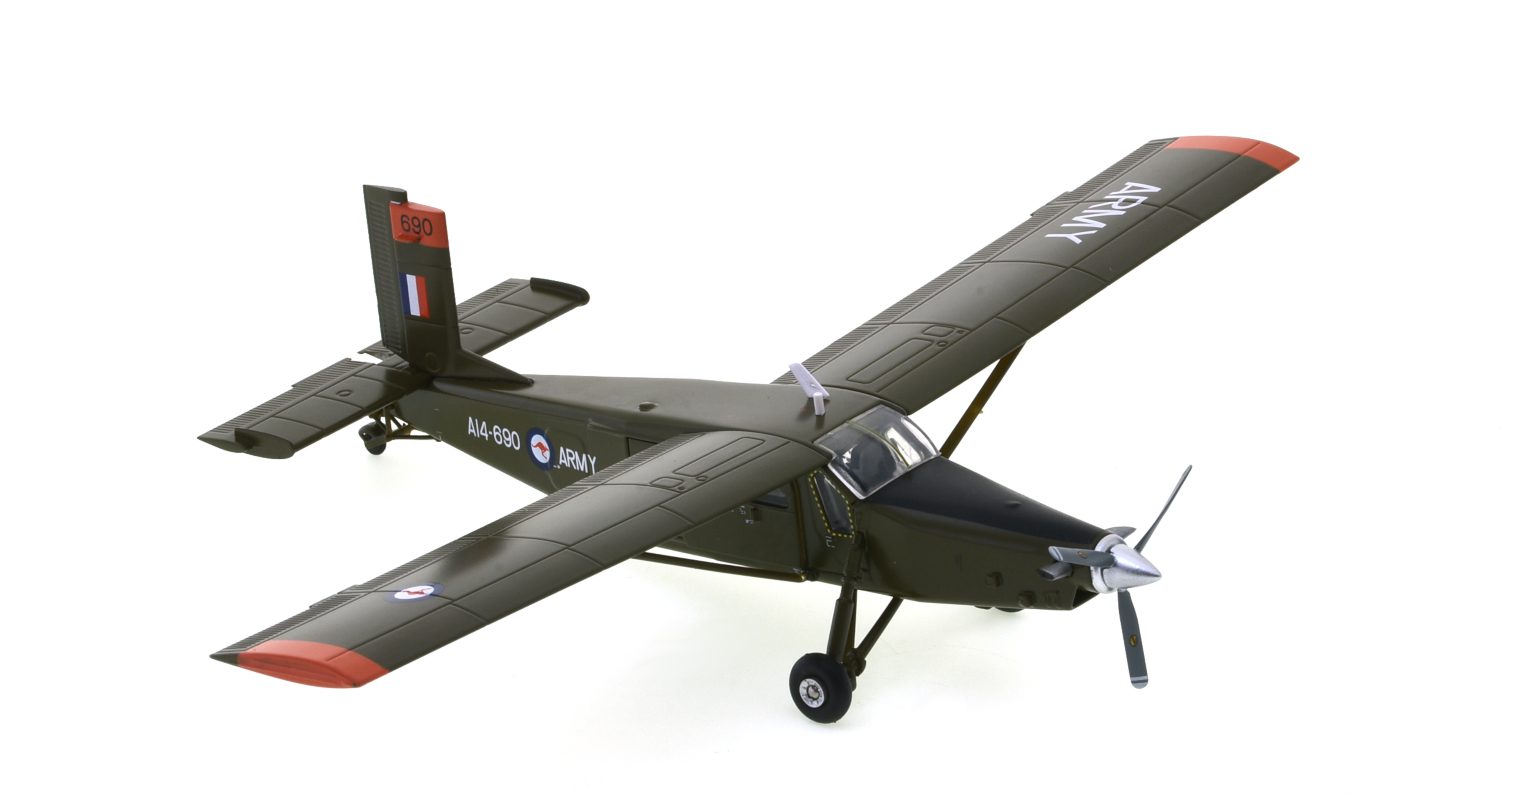 Front starboard view of Herpa HE580489 - 1/72 scale diecast model Pilatus PC-6B Turbo-Porter, s/n A14-690, 161 (Independent) Reconnaissance Flight, Australian Army Aviation Corps (AA AvnC), Nui Dat Air Base, Vietnam, 1969.